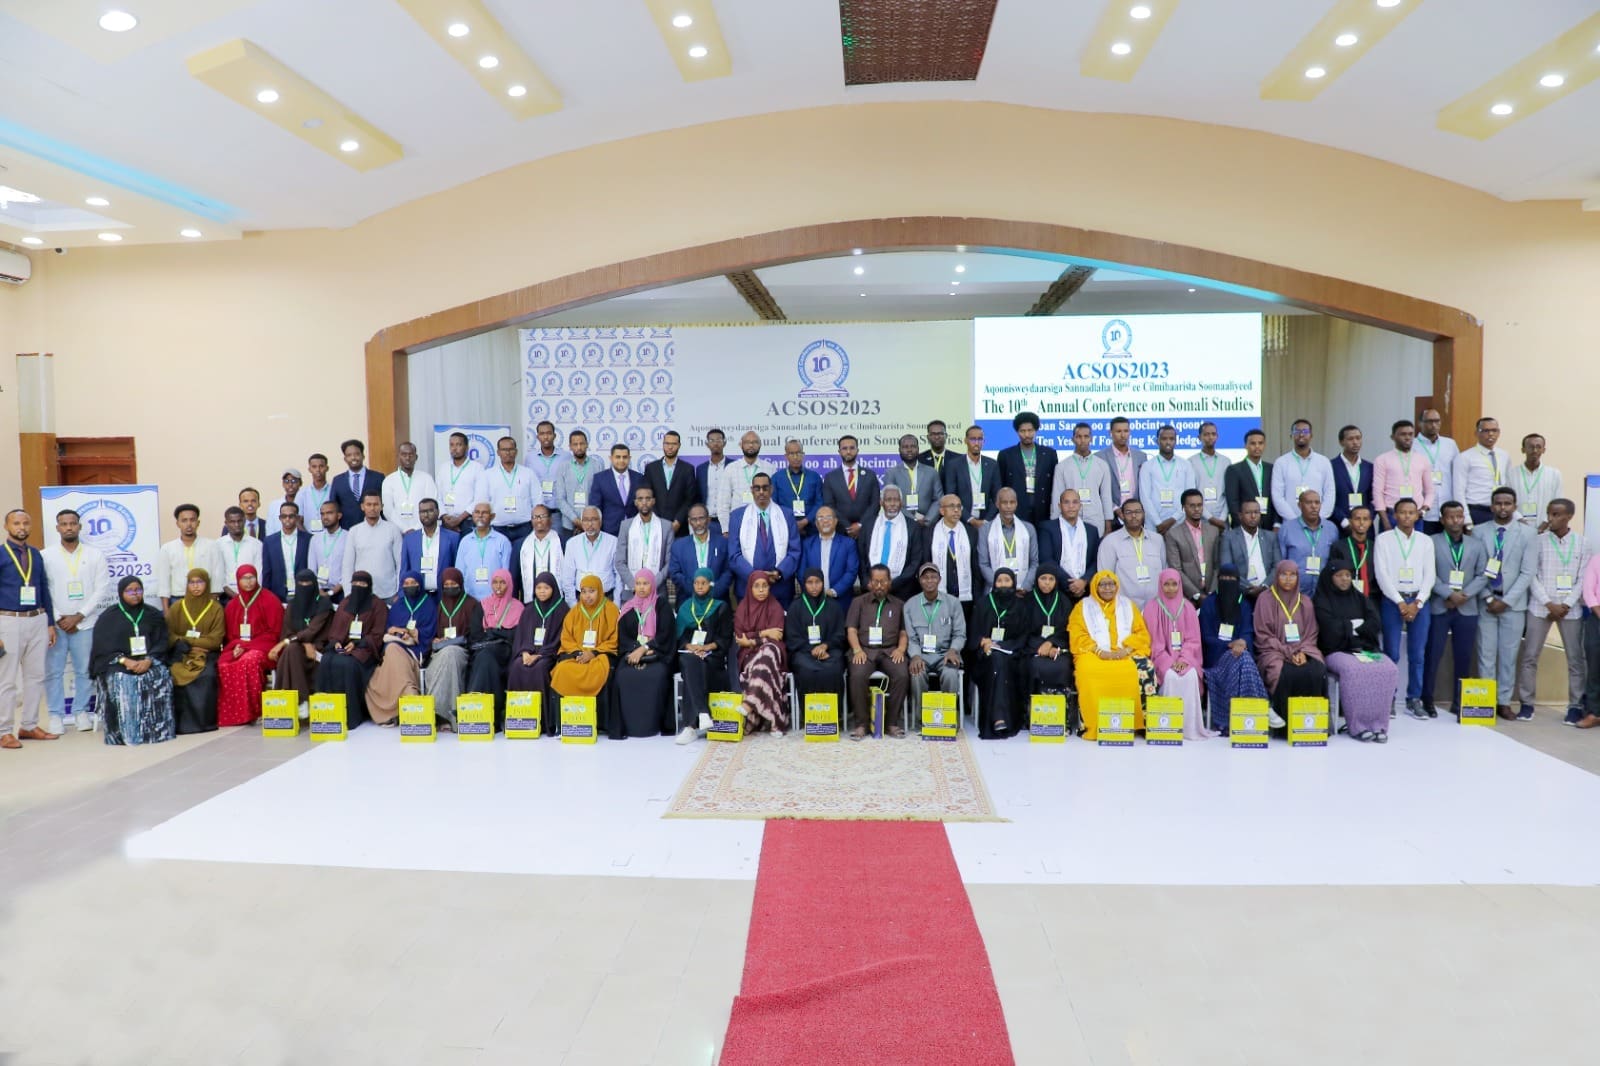 The 10th Annual Conference on Somali Studies (ACSOS2023) Concludes in Mogadishu